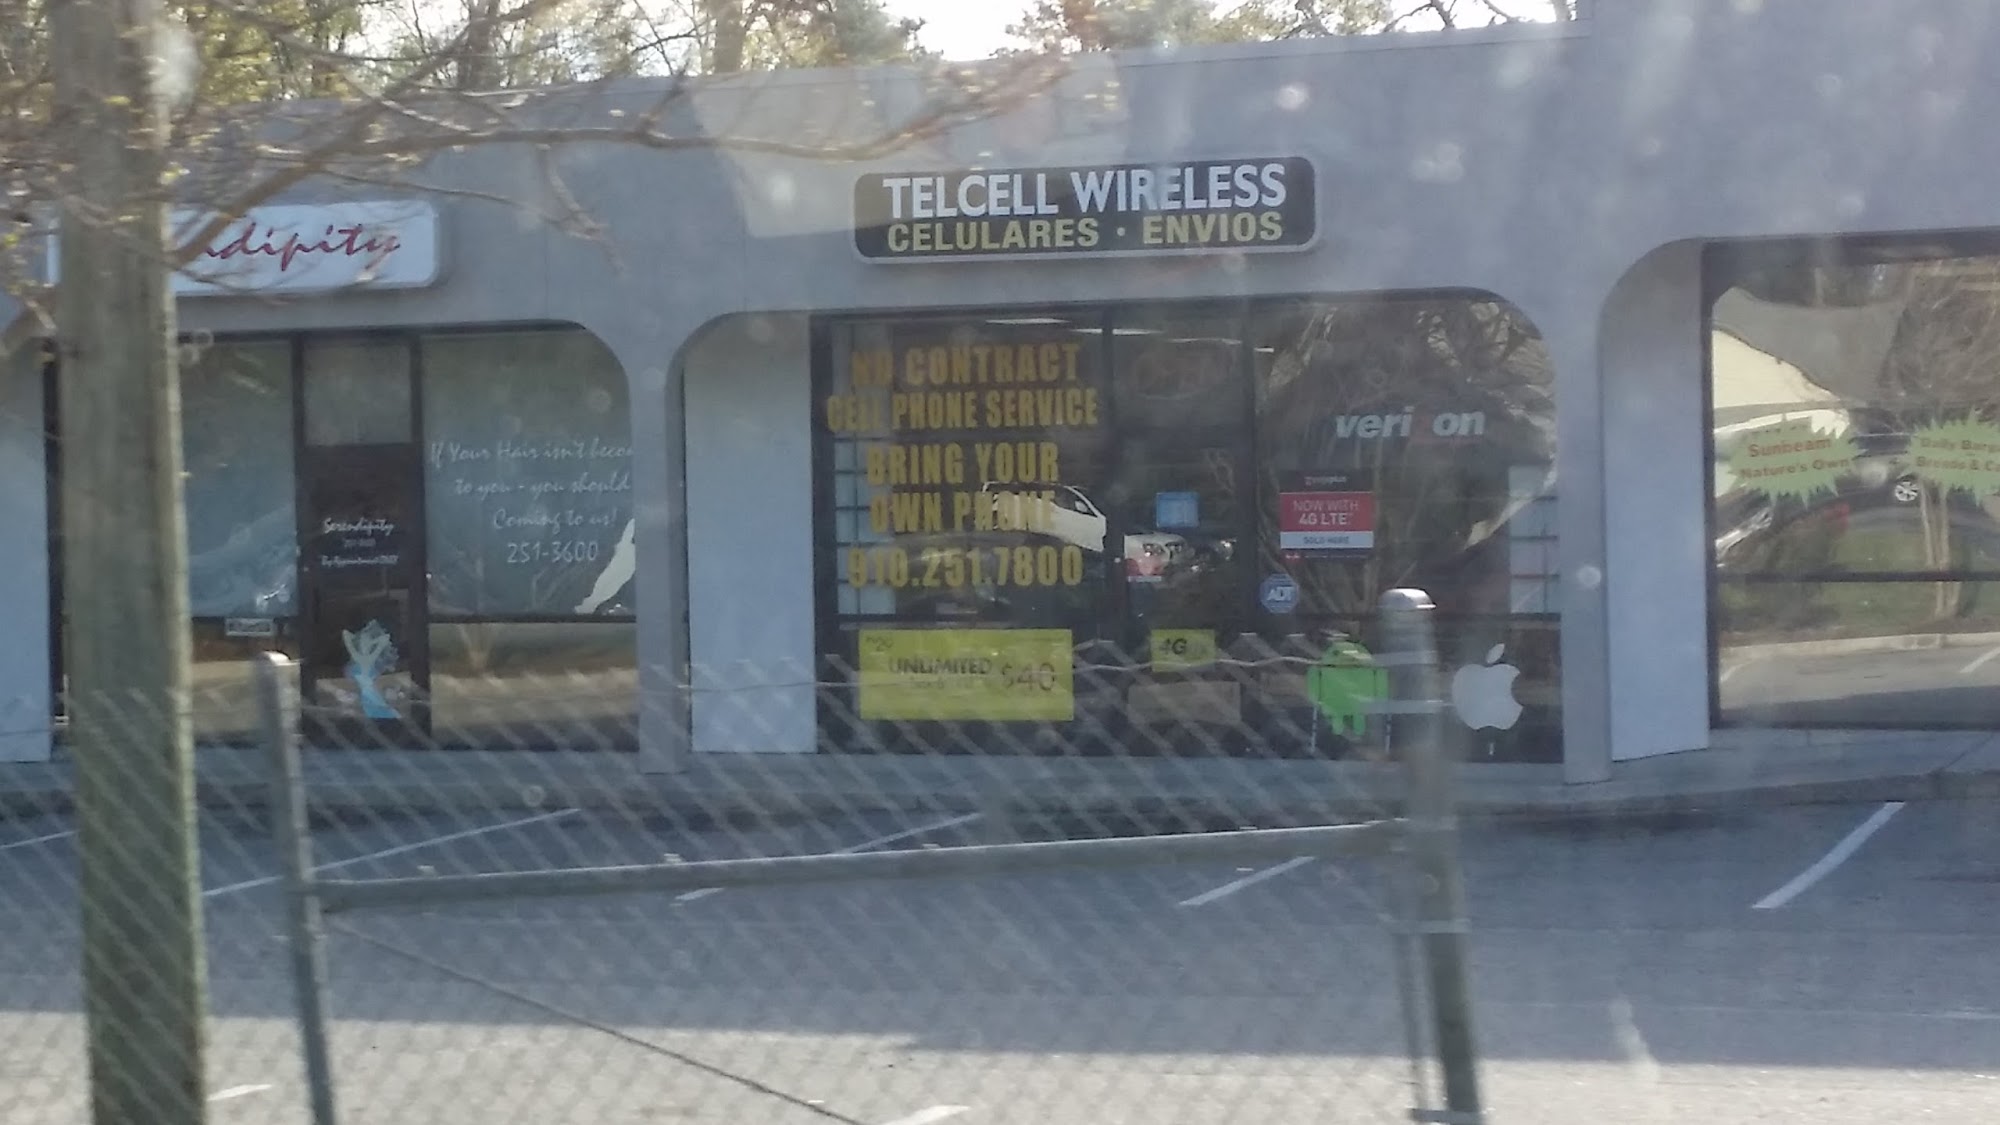 Telcell Wireless